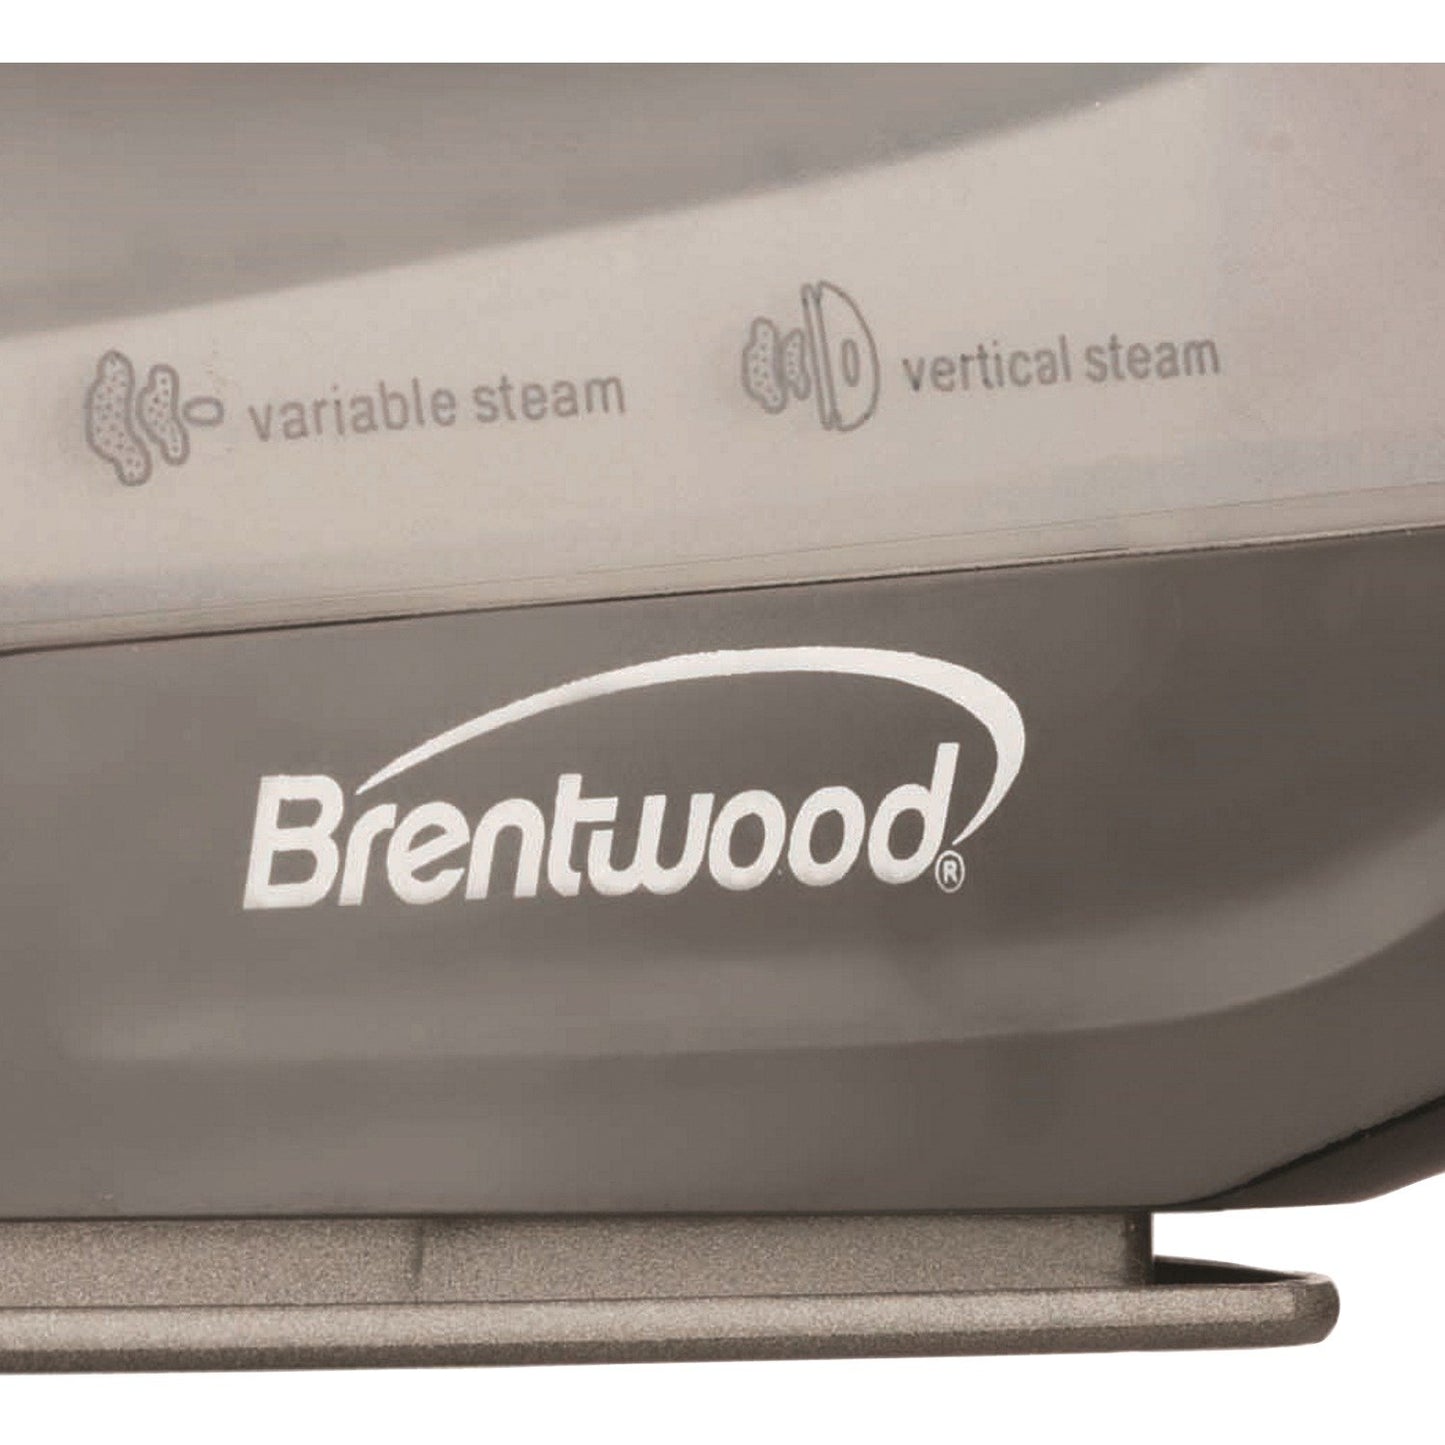 BRENTWOOD MPI-54 Nonstck Steam/Dry Iron Red